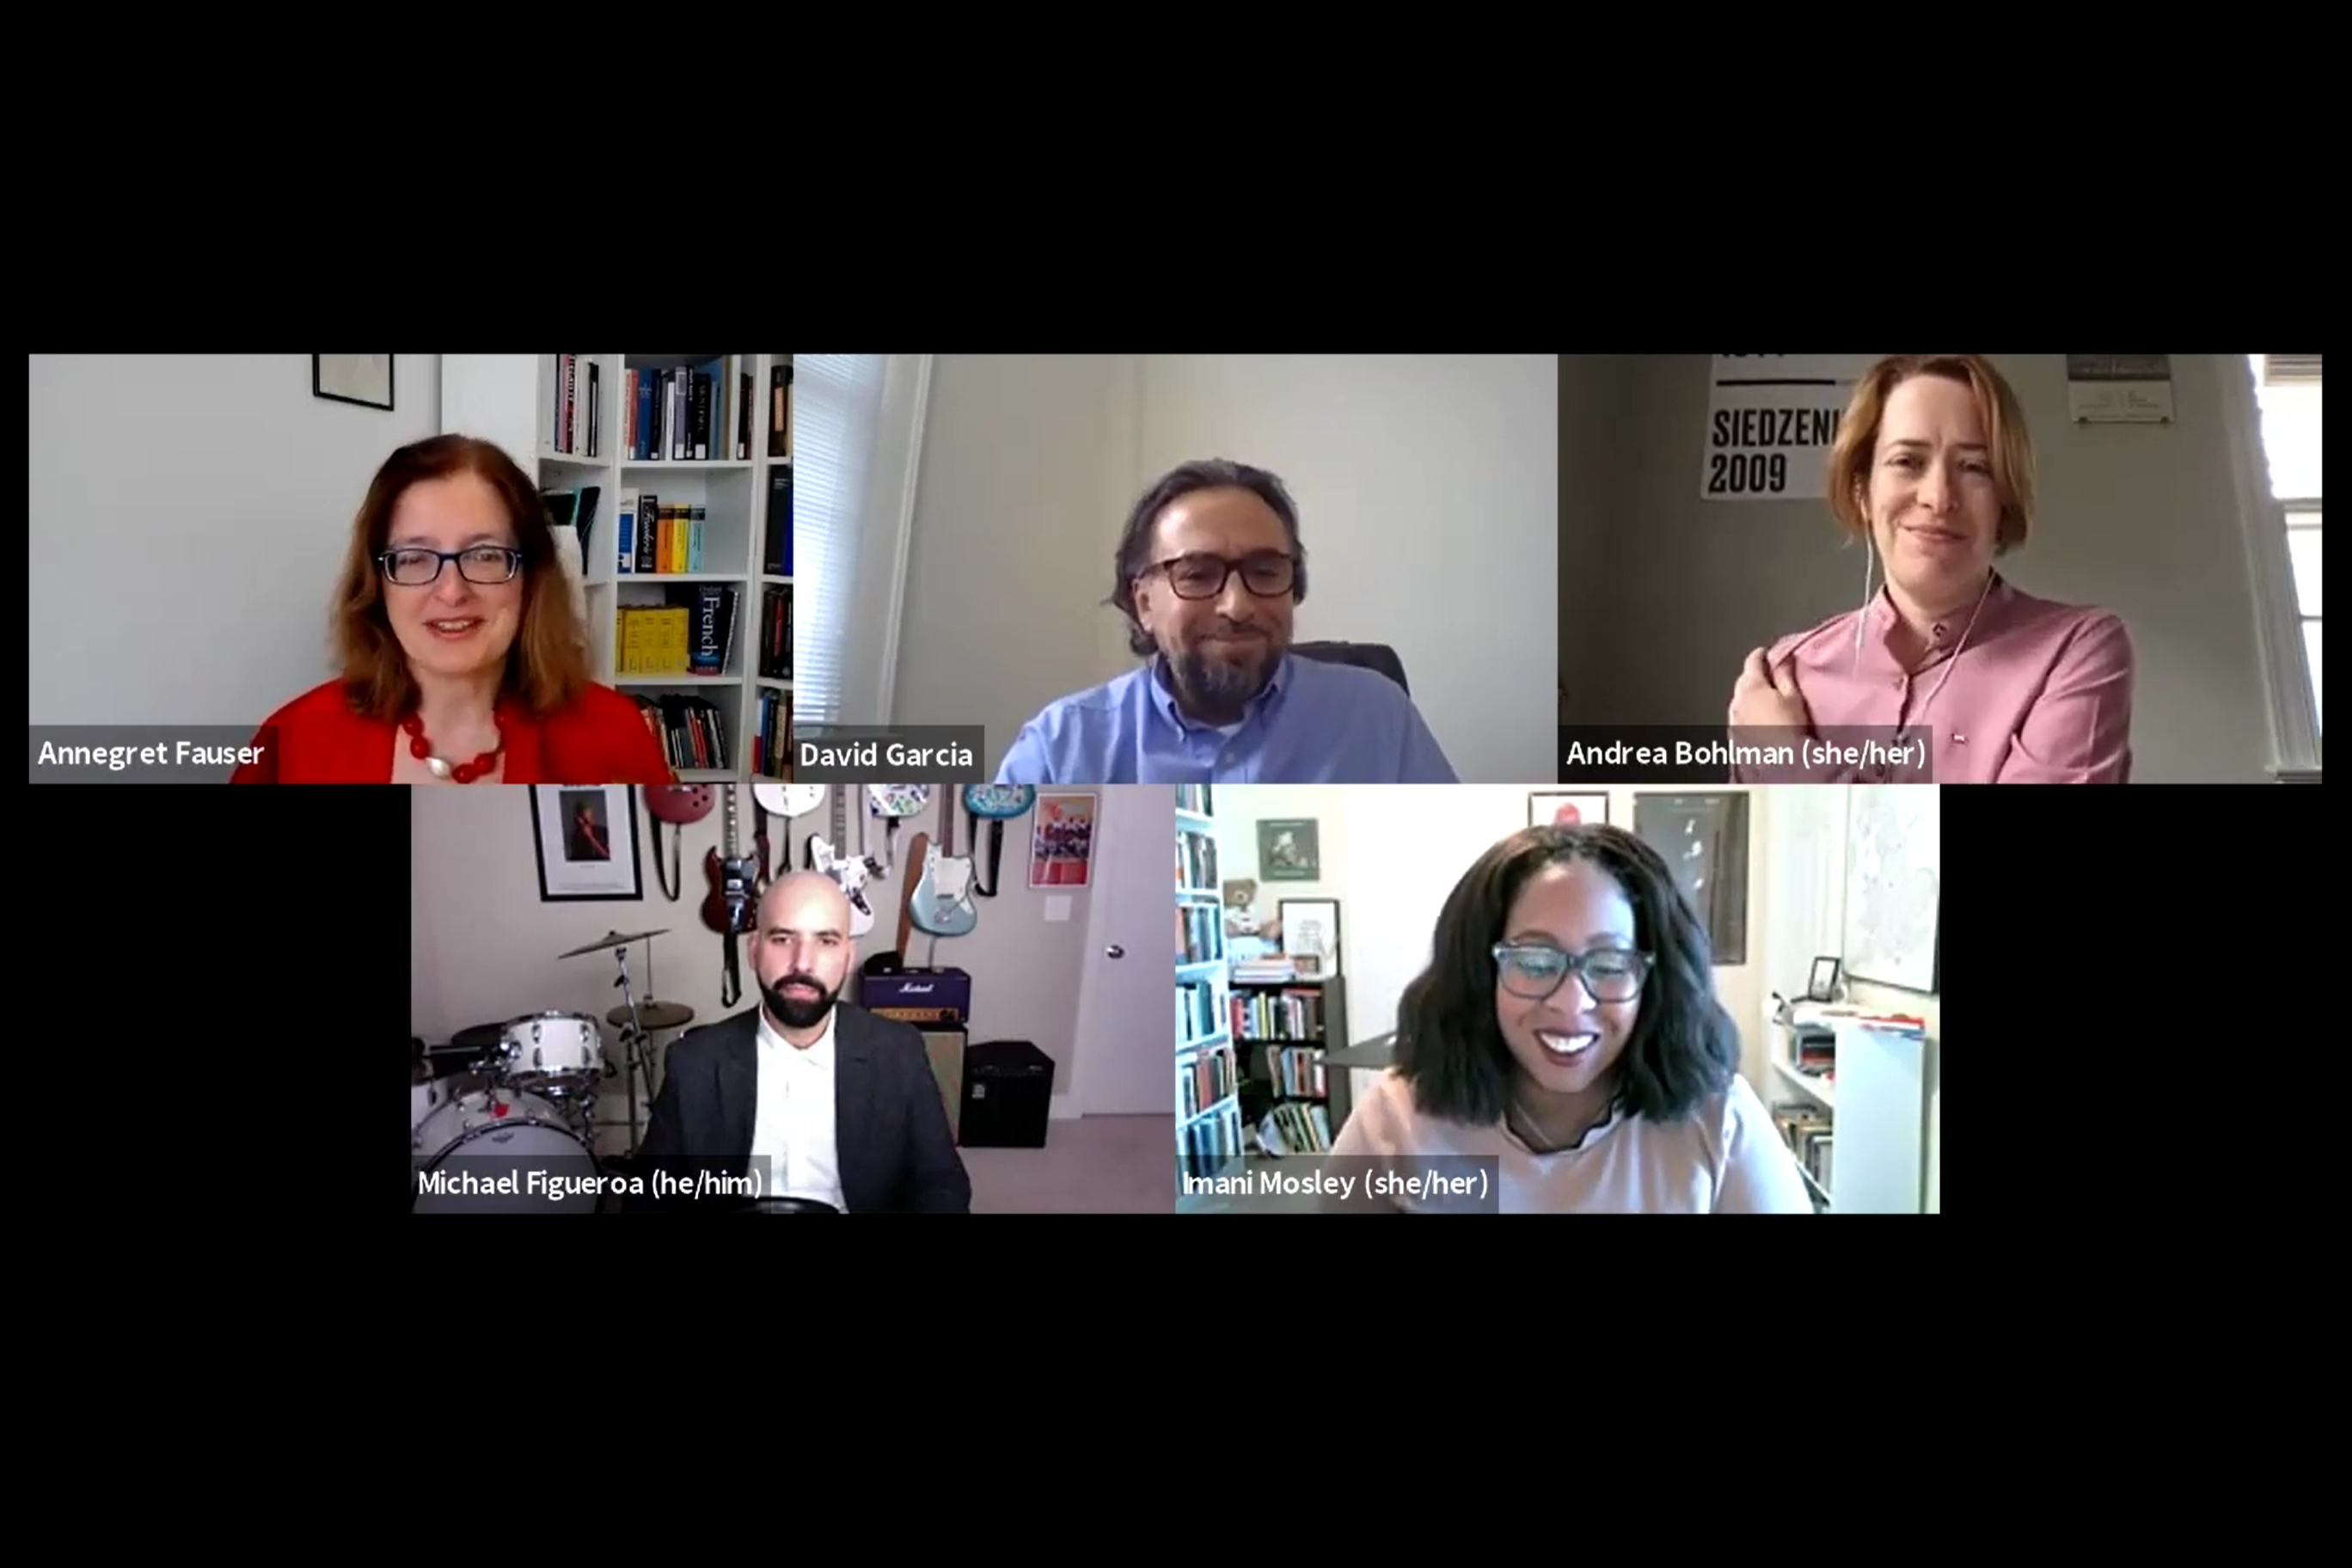 Screenshot of the Performing Commemoration book talk, featuring (clockwise from top left): Annegret Fauser, David Garcia, Andrea Bohlman, Imani Mosely, and Michael A. Figueroa